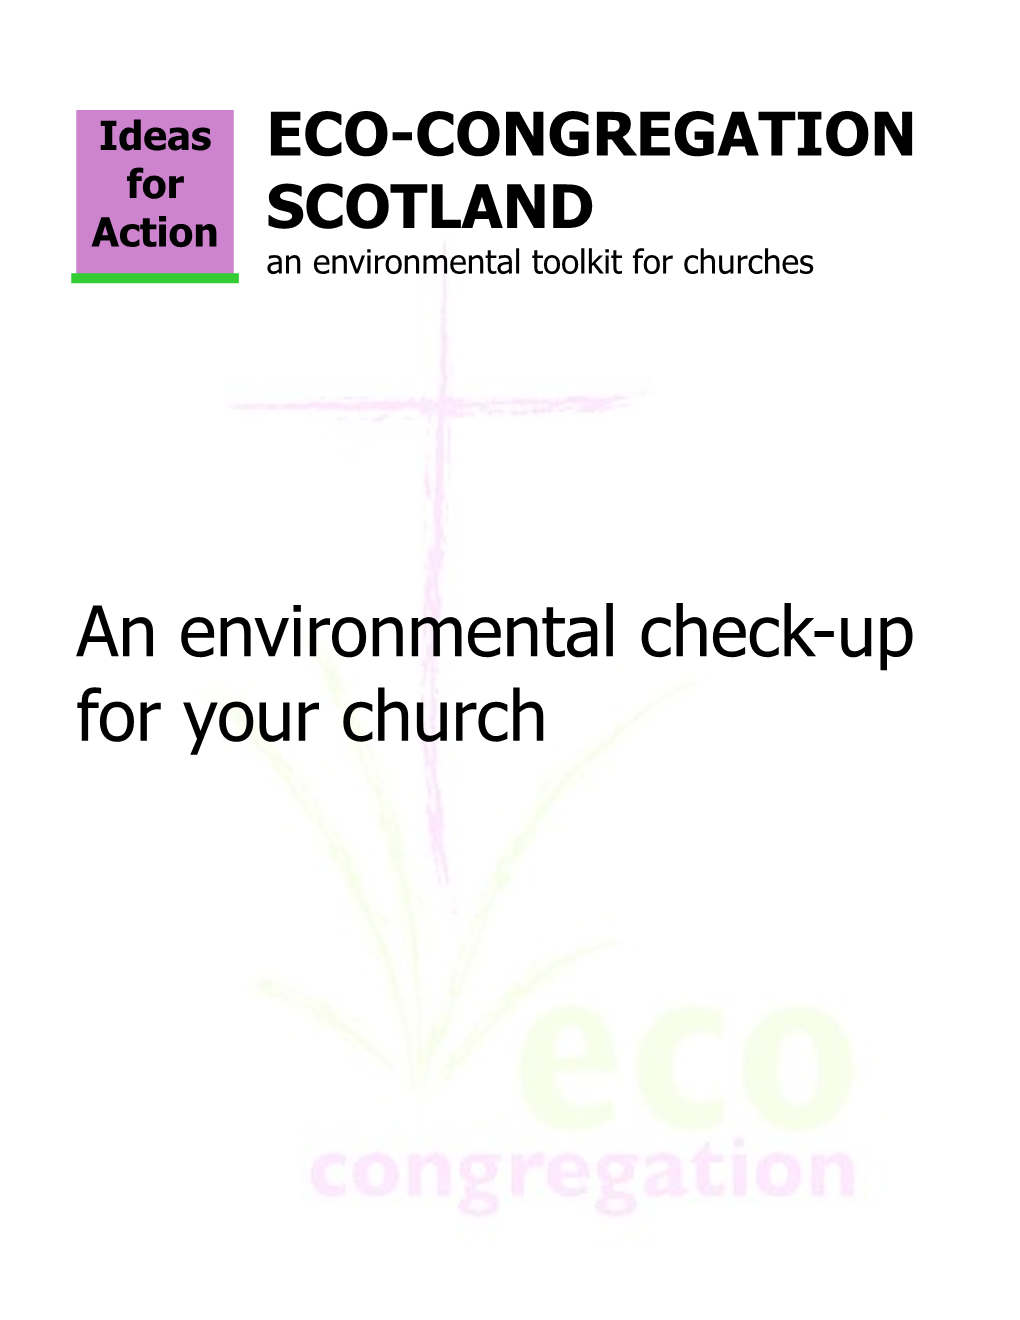 An Environmental Check-Up for Your Church